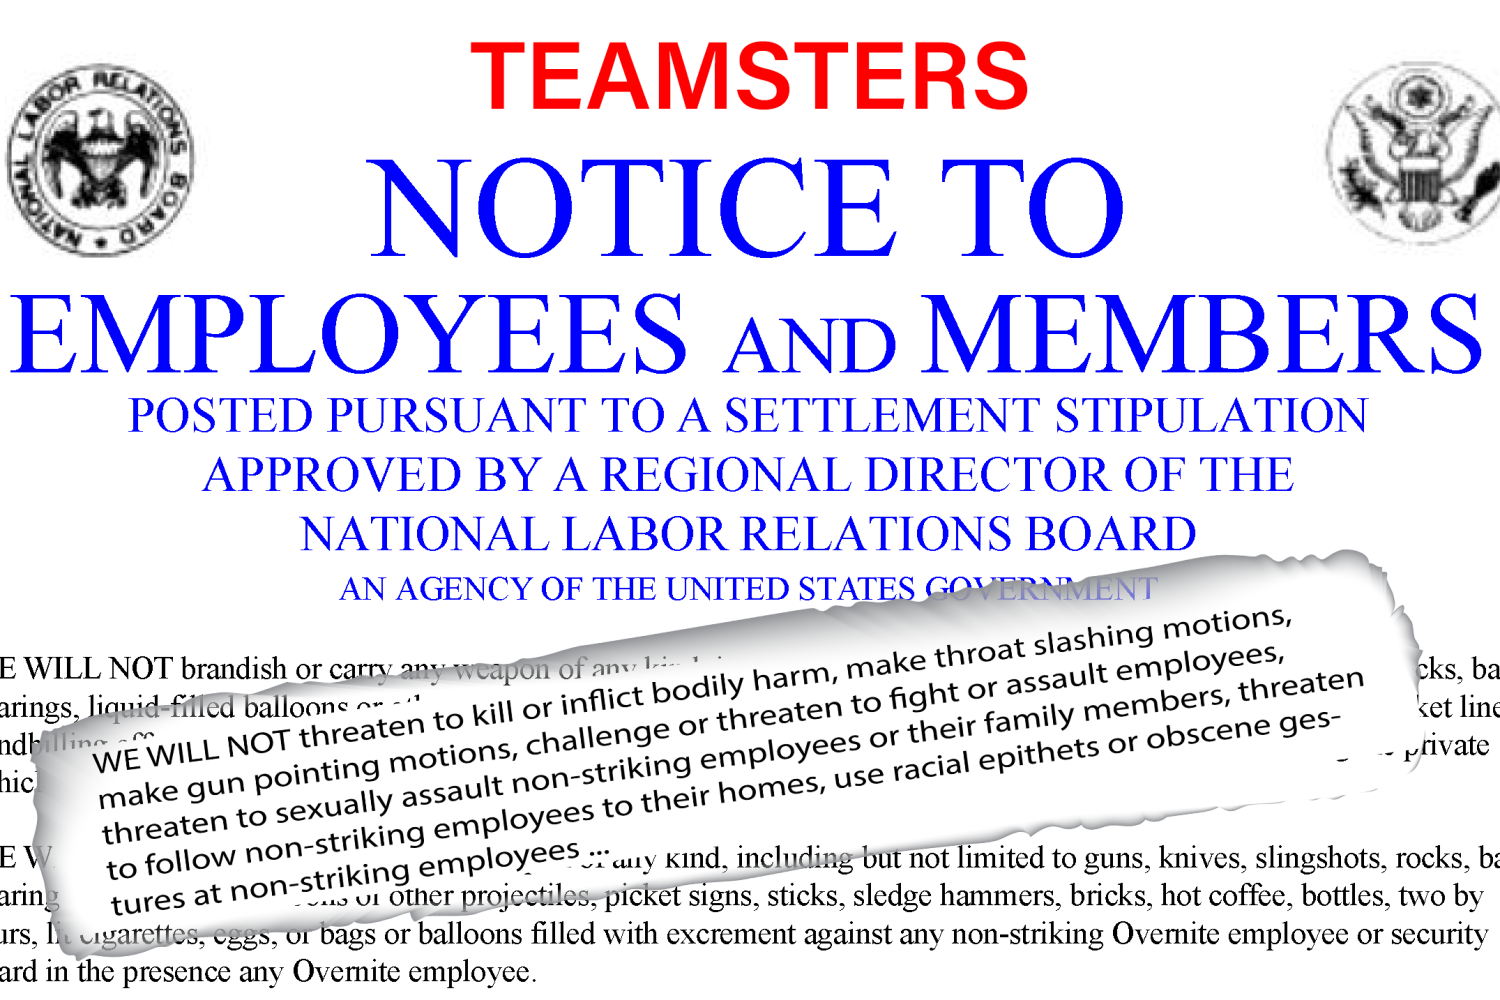 A notice to employees and members of the national labor relations board.